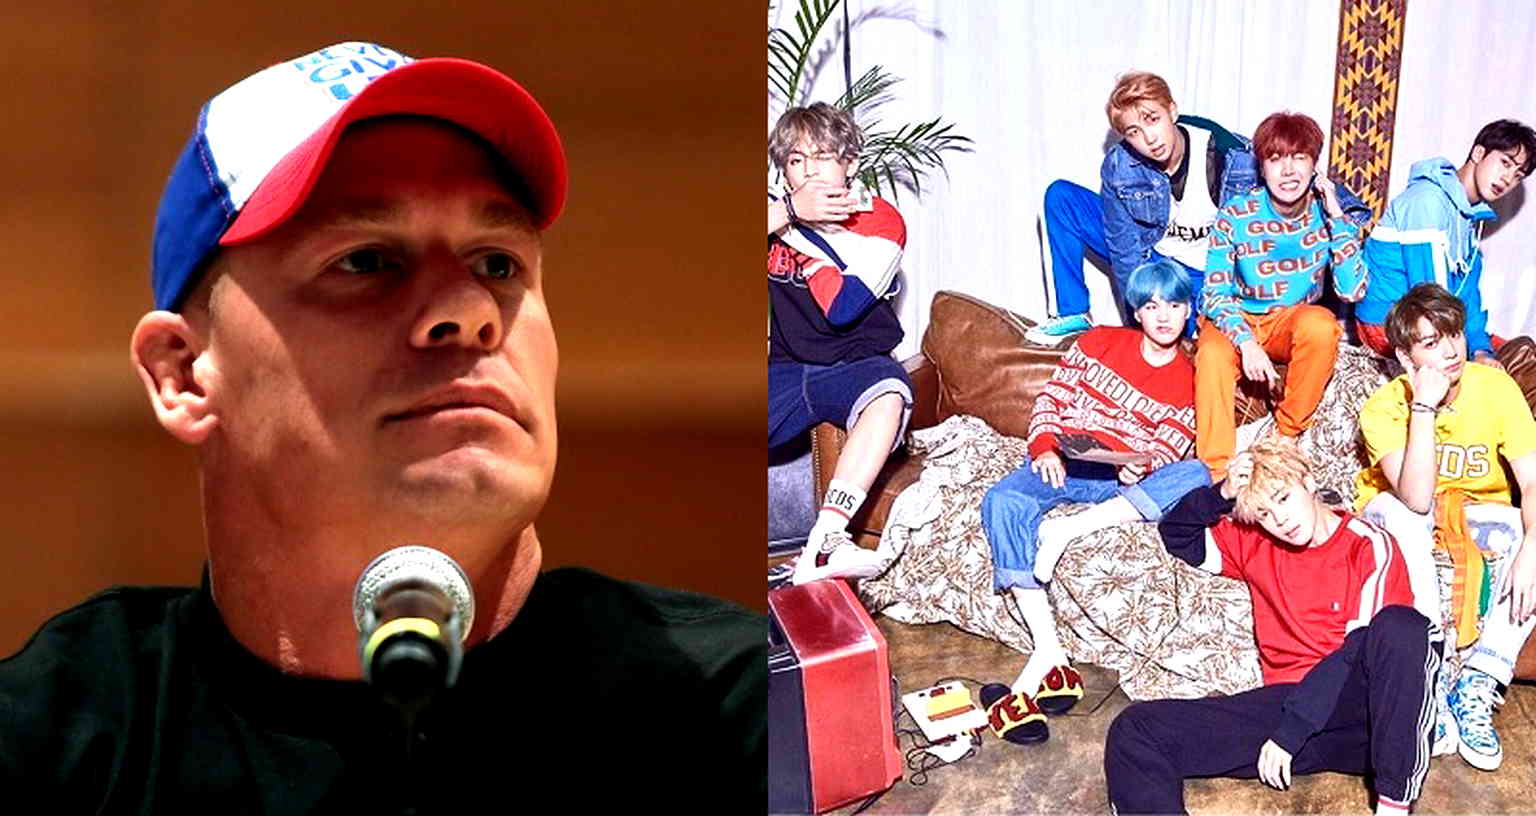 WWE Wrestler John Cena Officially Confirms He is Part of the BTS ARMY